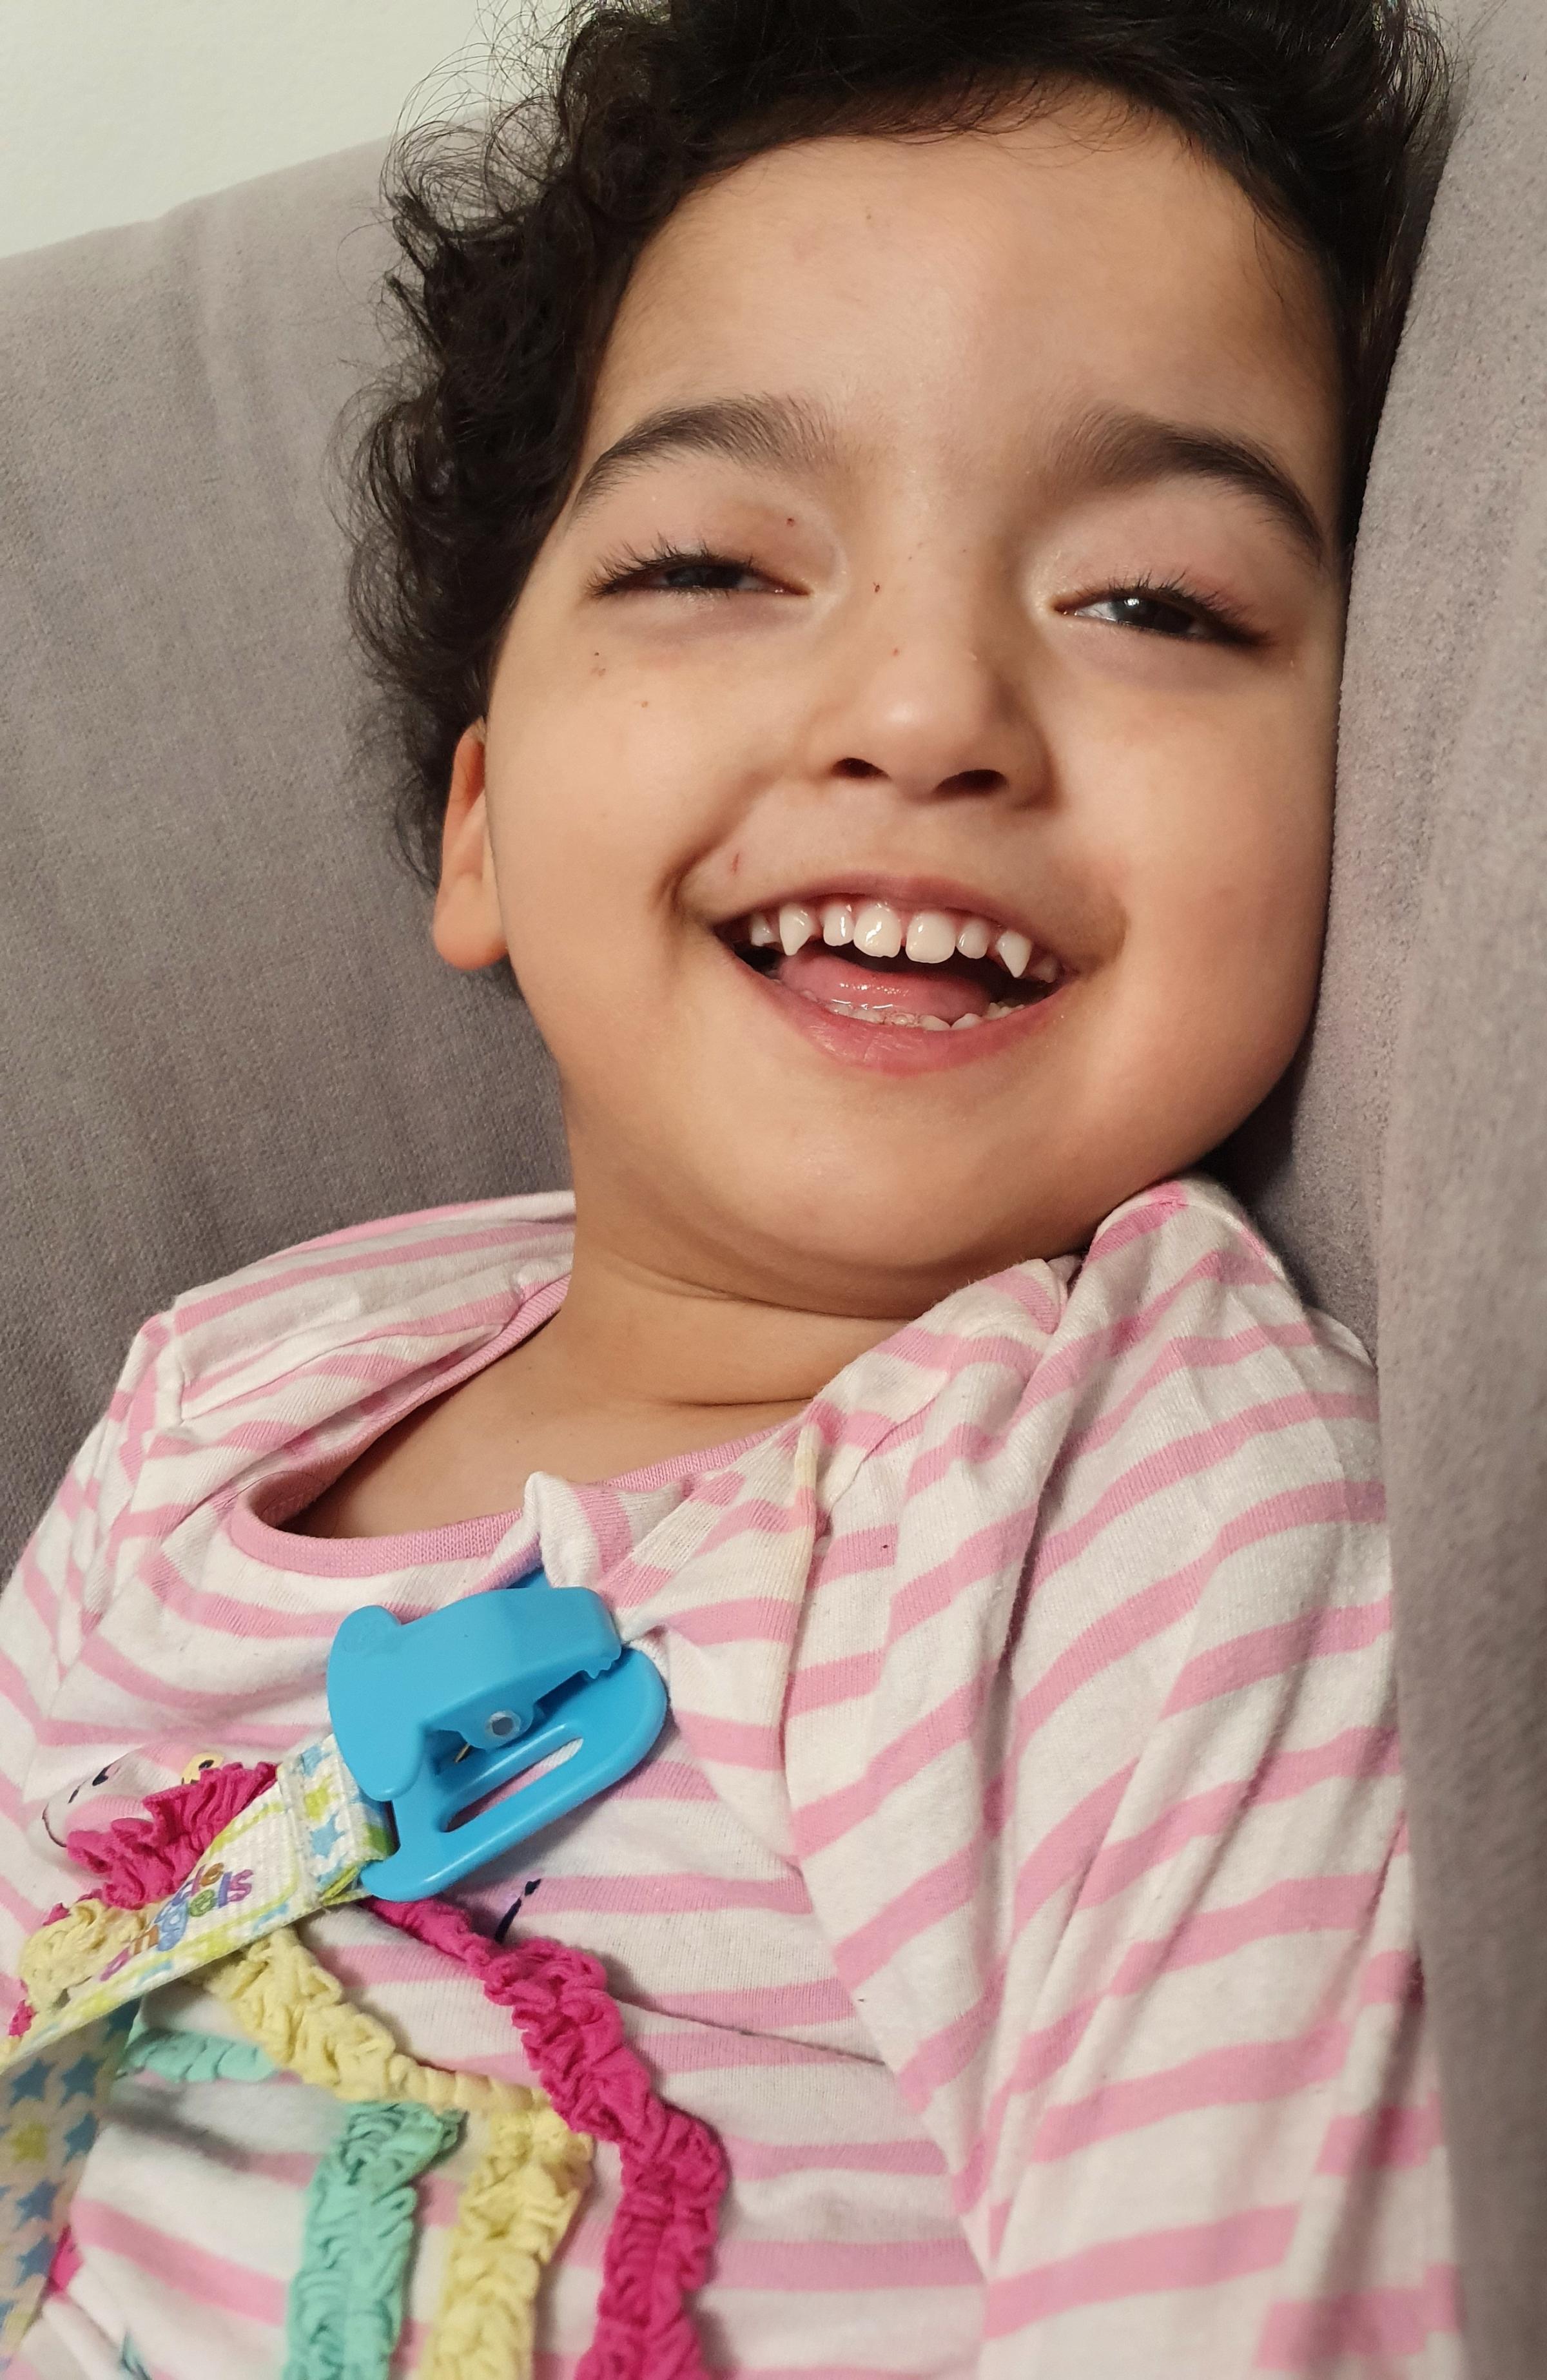 Yusra passed away on March 8 at the age of four